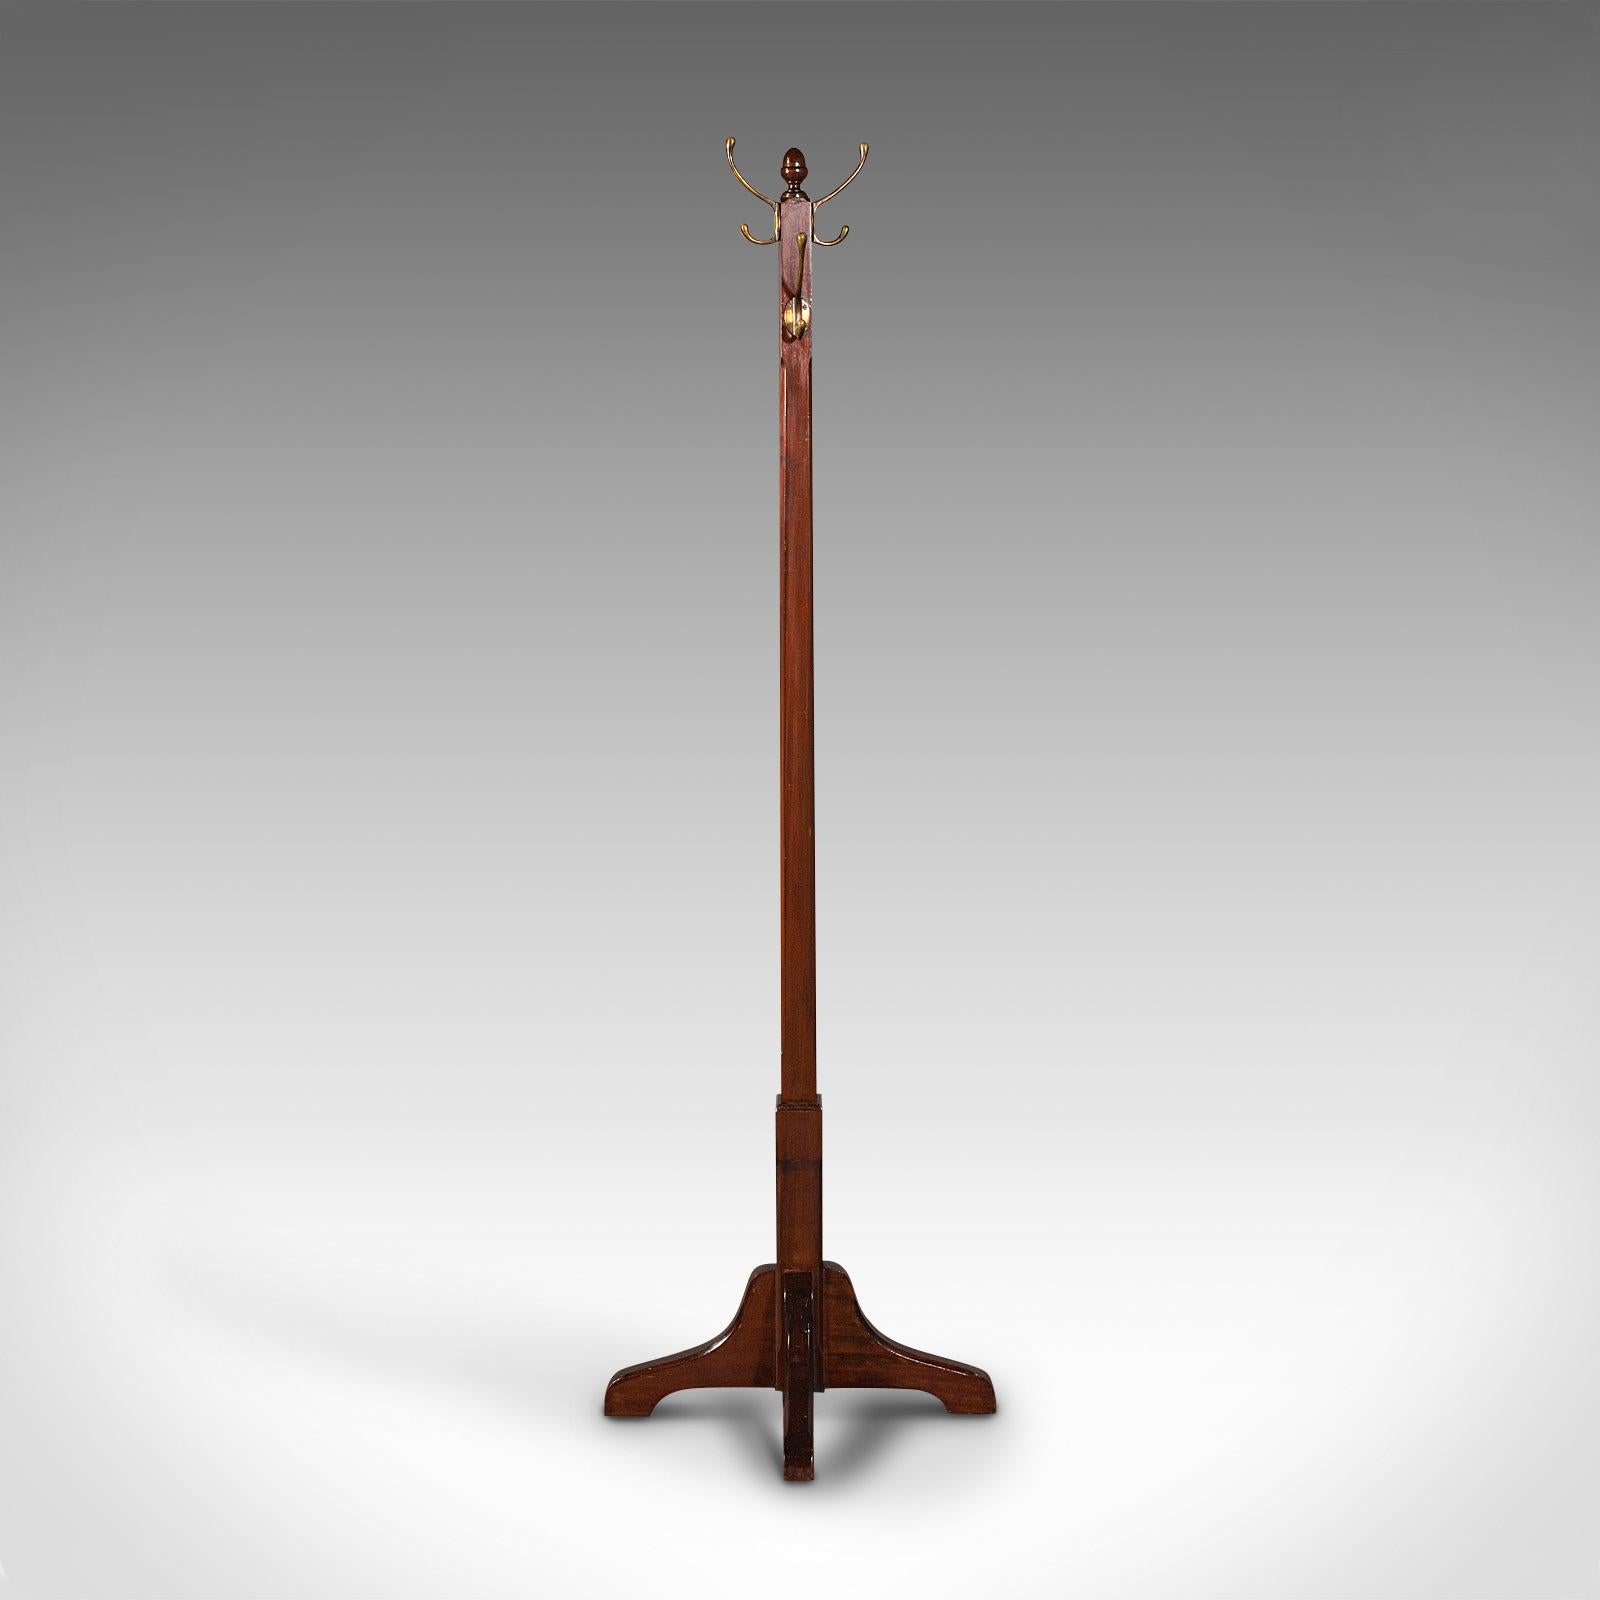 This is an antique coat stand. An English, mahogany and brass hallway hat rack, dating to the Edwardian period, circa 1910.

Appealing hall stand of fine quality and practical proportion
Displays a desirable aged patina throughout
Mahogany shows